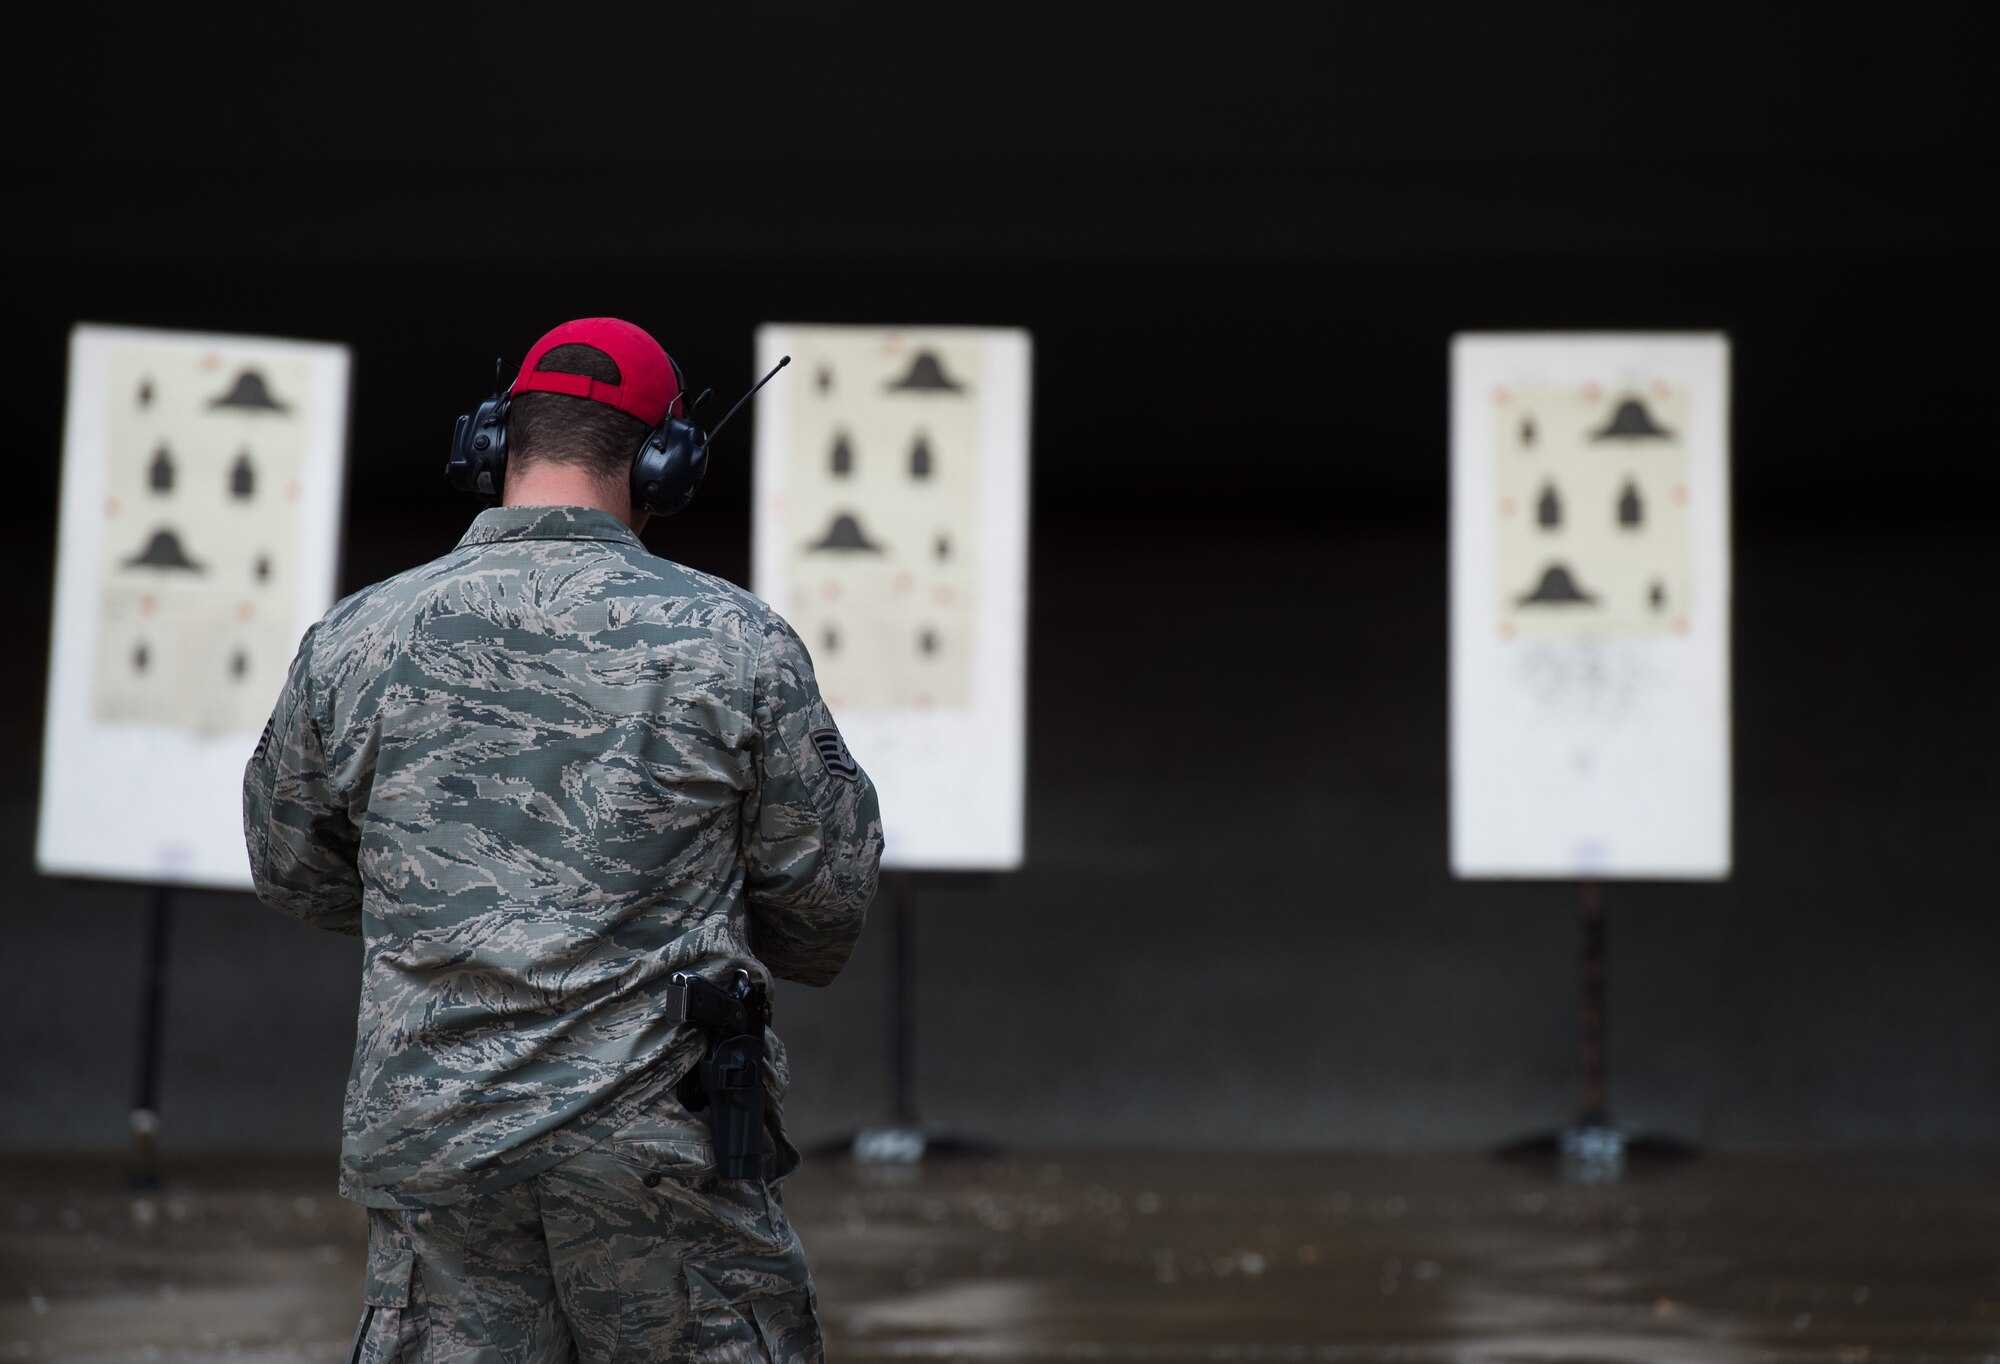 U.S. Air Force Staff Sgt. Garrett Christ, 633rd Security Forces Squadron combat arms training and maintenance range instructor, checks and scores the targets at the combat arms training and maintenance at Joint Base Langley-Eustis, Va., Jan. 23, 2018.